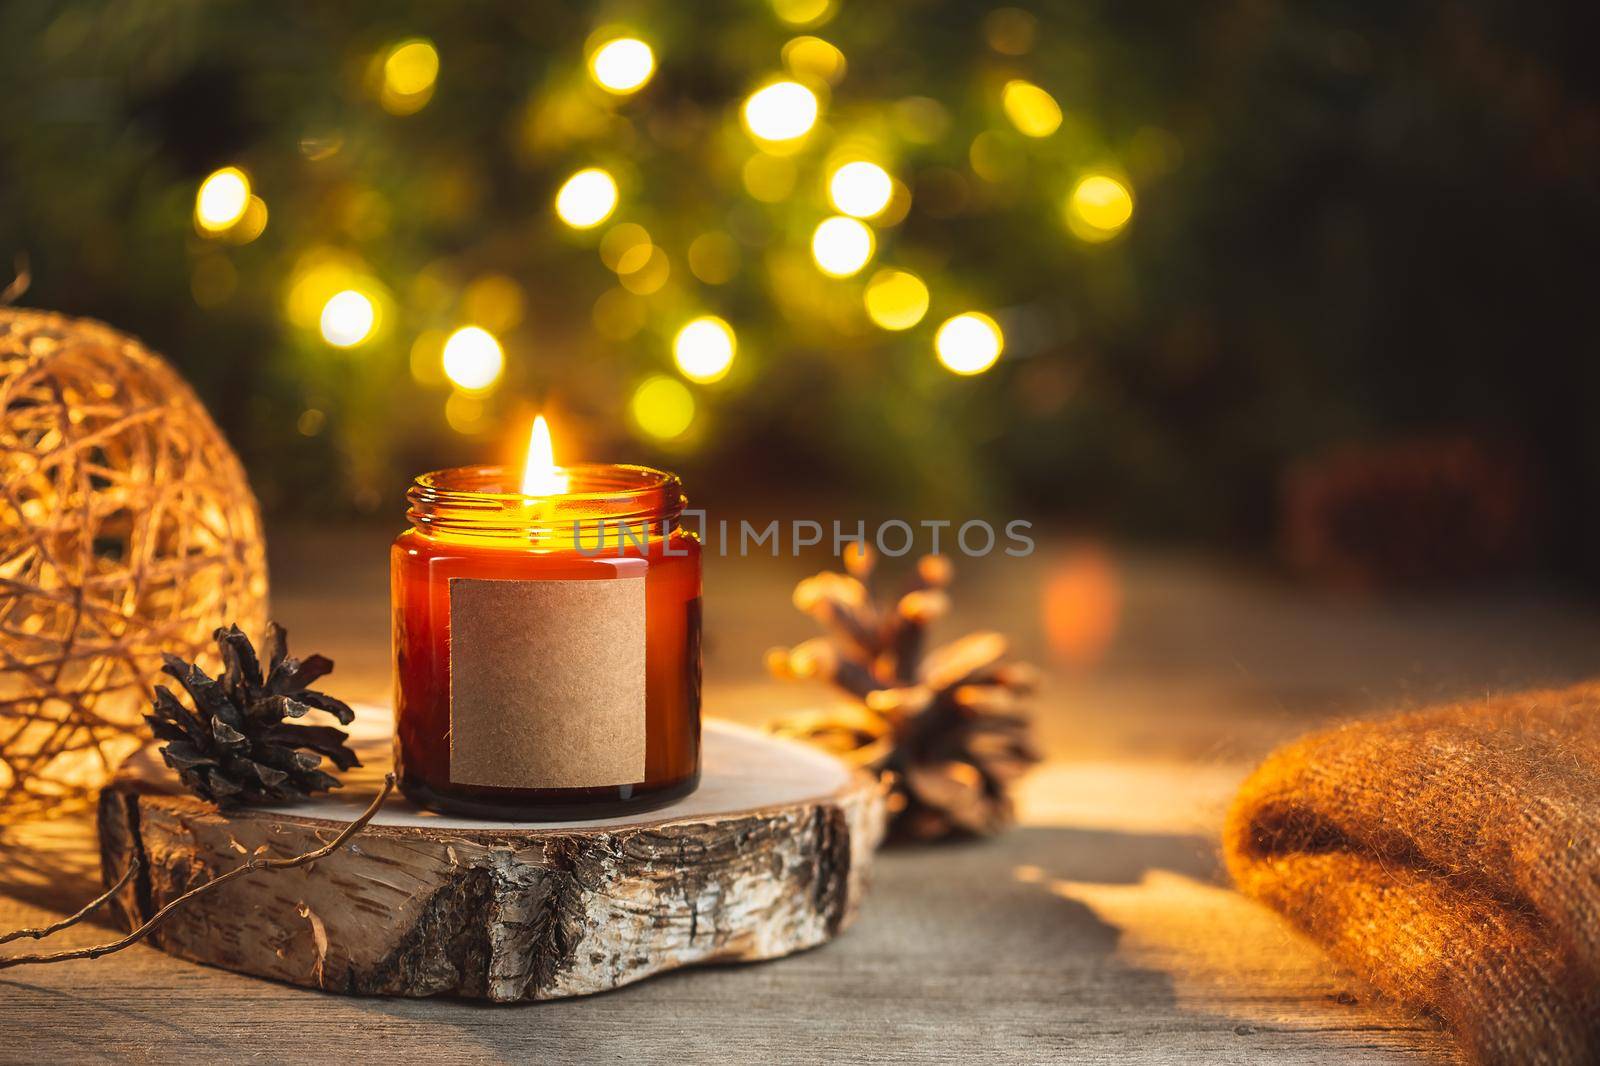 Cozy winter evening card with burning aroma, candle in a dark glass jar with empty label mock up. Soft focus, copy space for text. Blurred bokeh lights on the background. Christmas holiday at home.